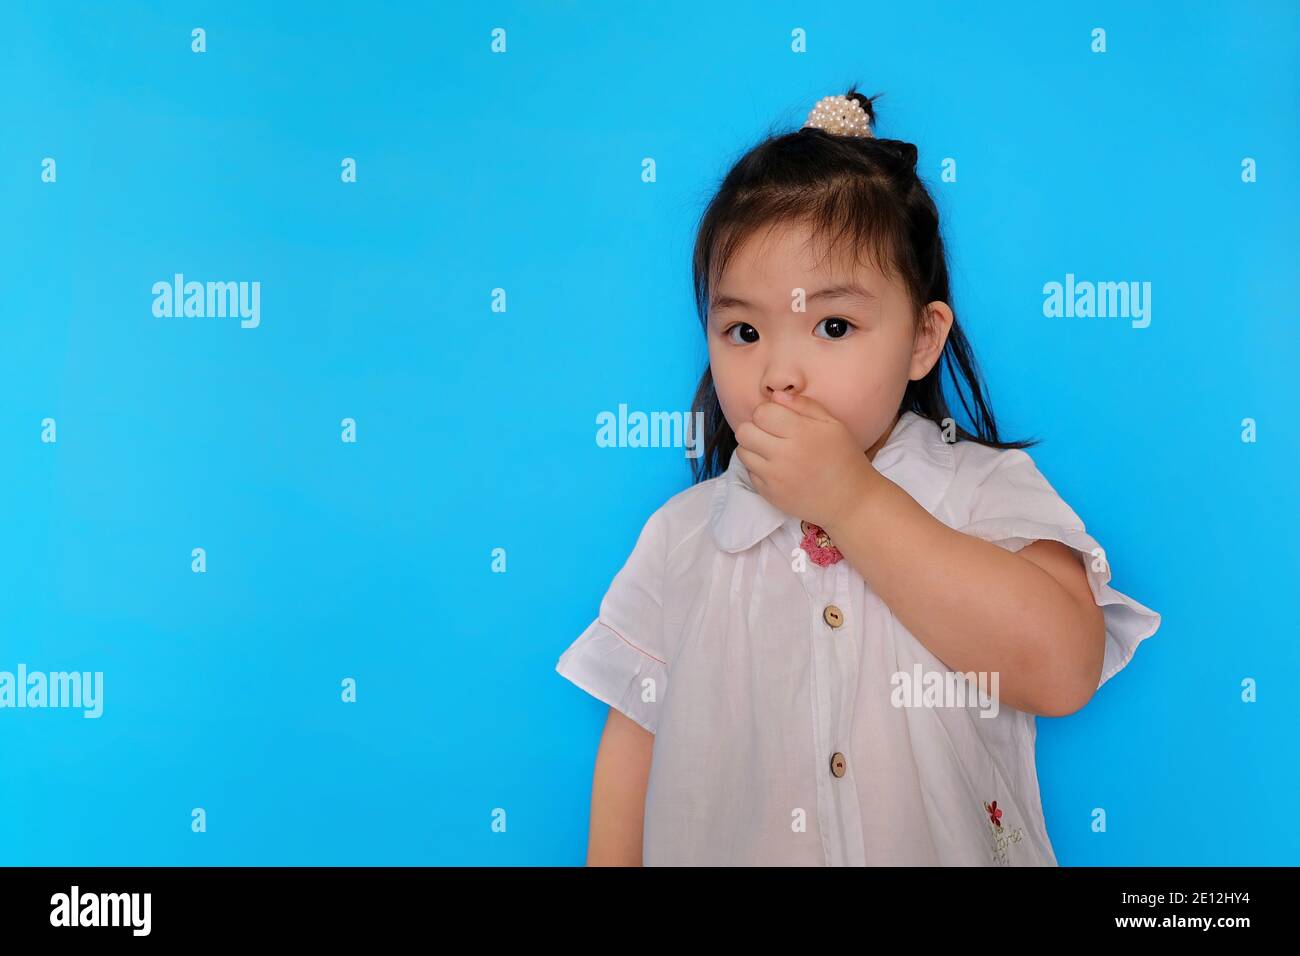 A cute young Asian girl is trying to keep a secret, covering her mouth with her hand, acting suspicious. Plain light blue background. Stock Photo